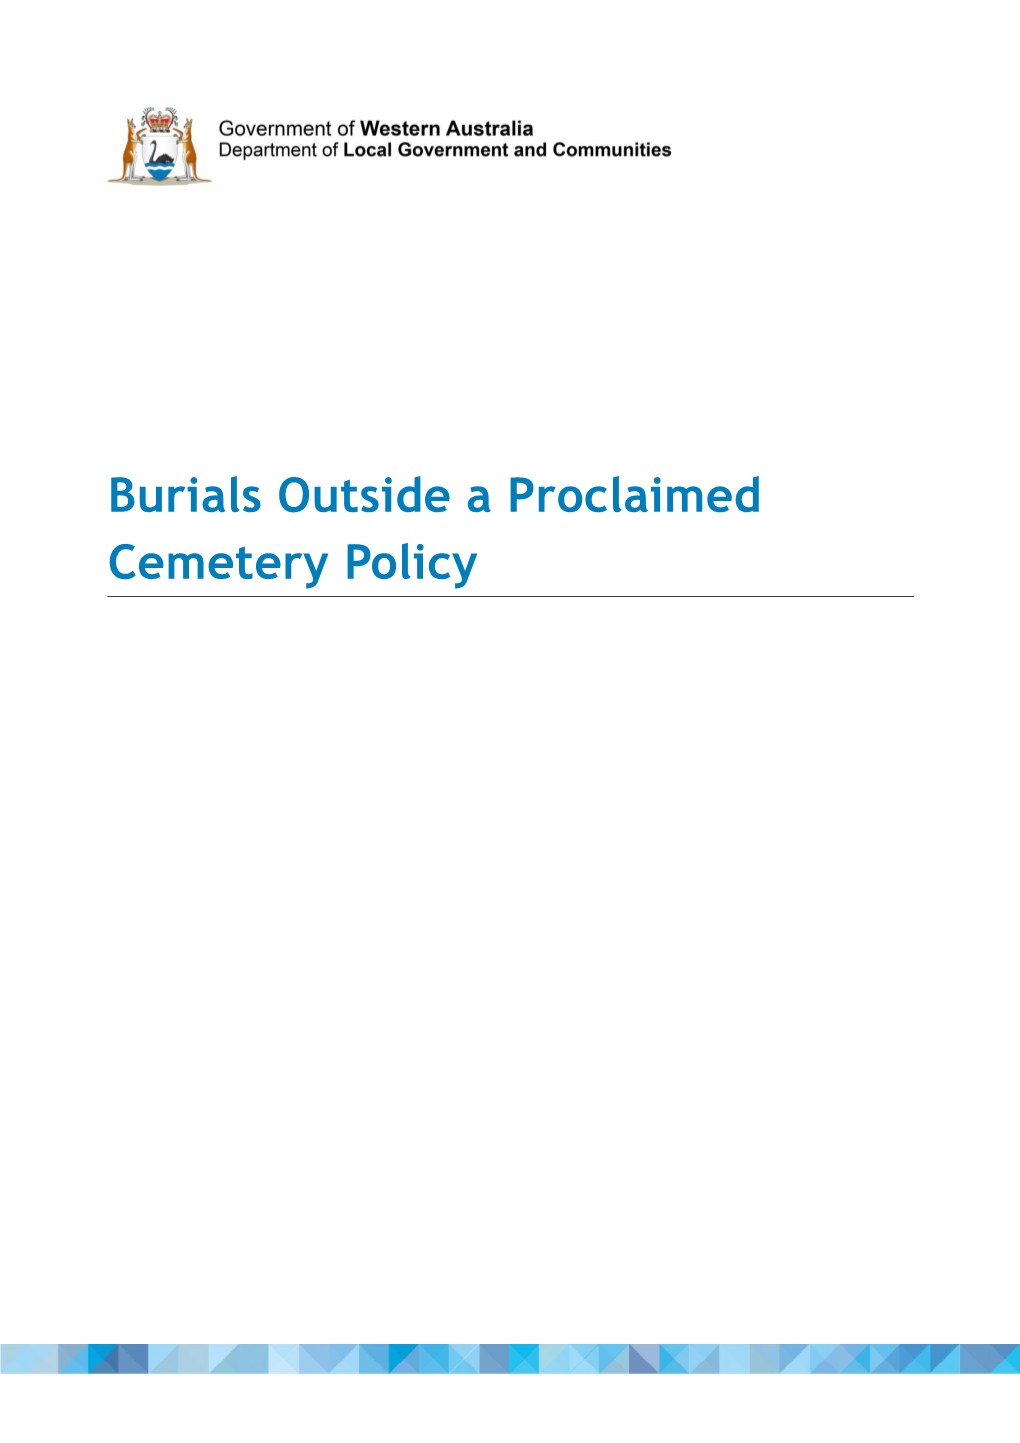 Burial Outside a Proclaimed Cemetery - Policy